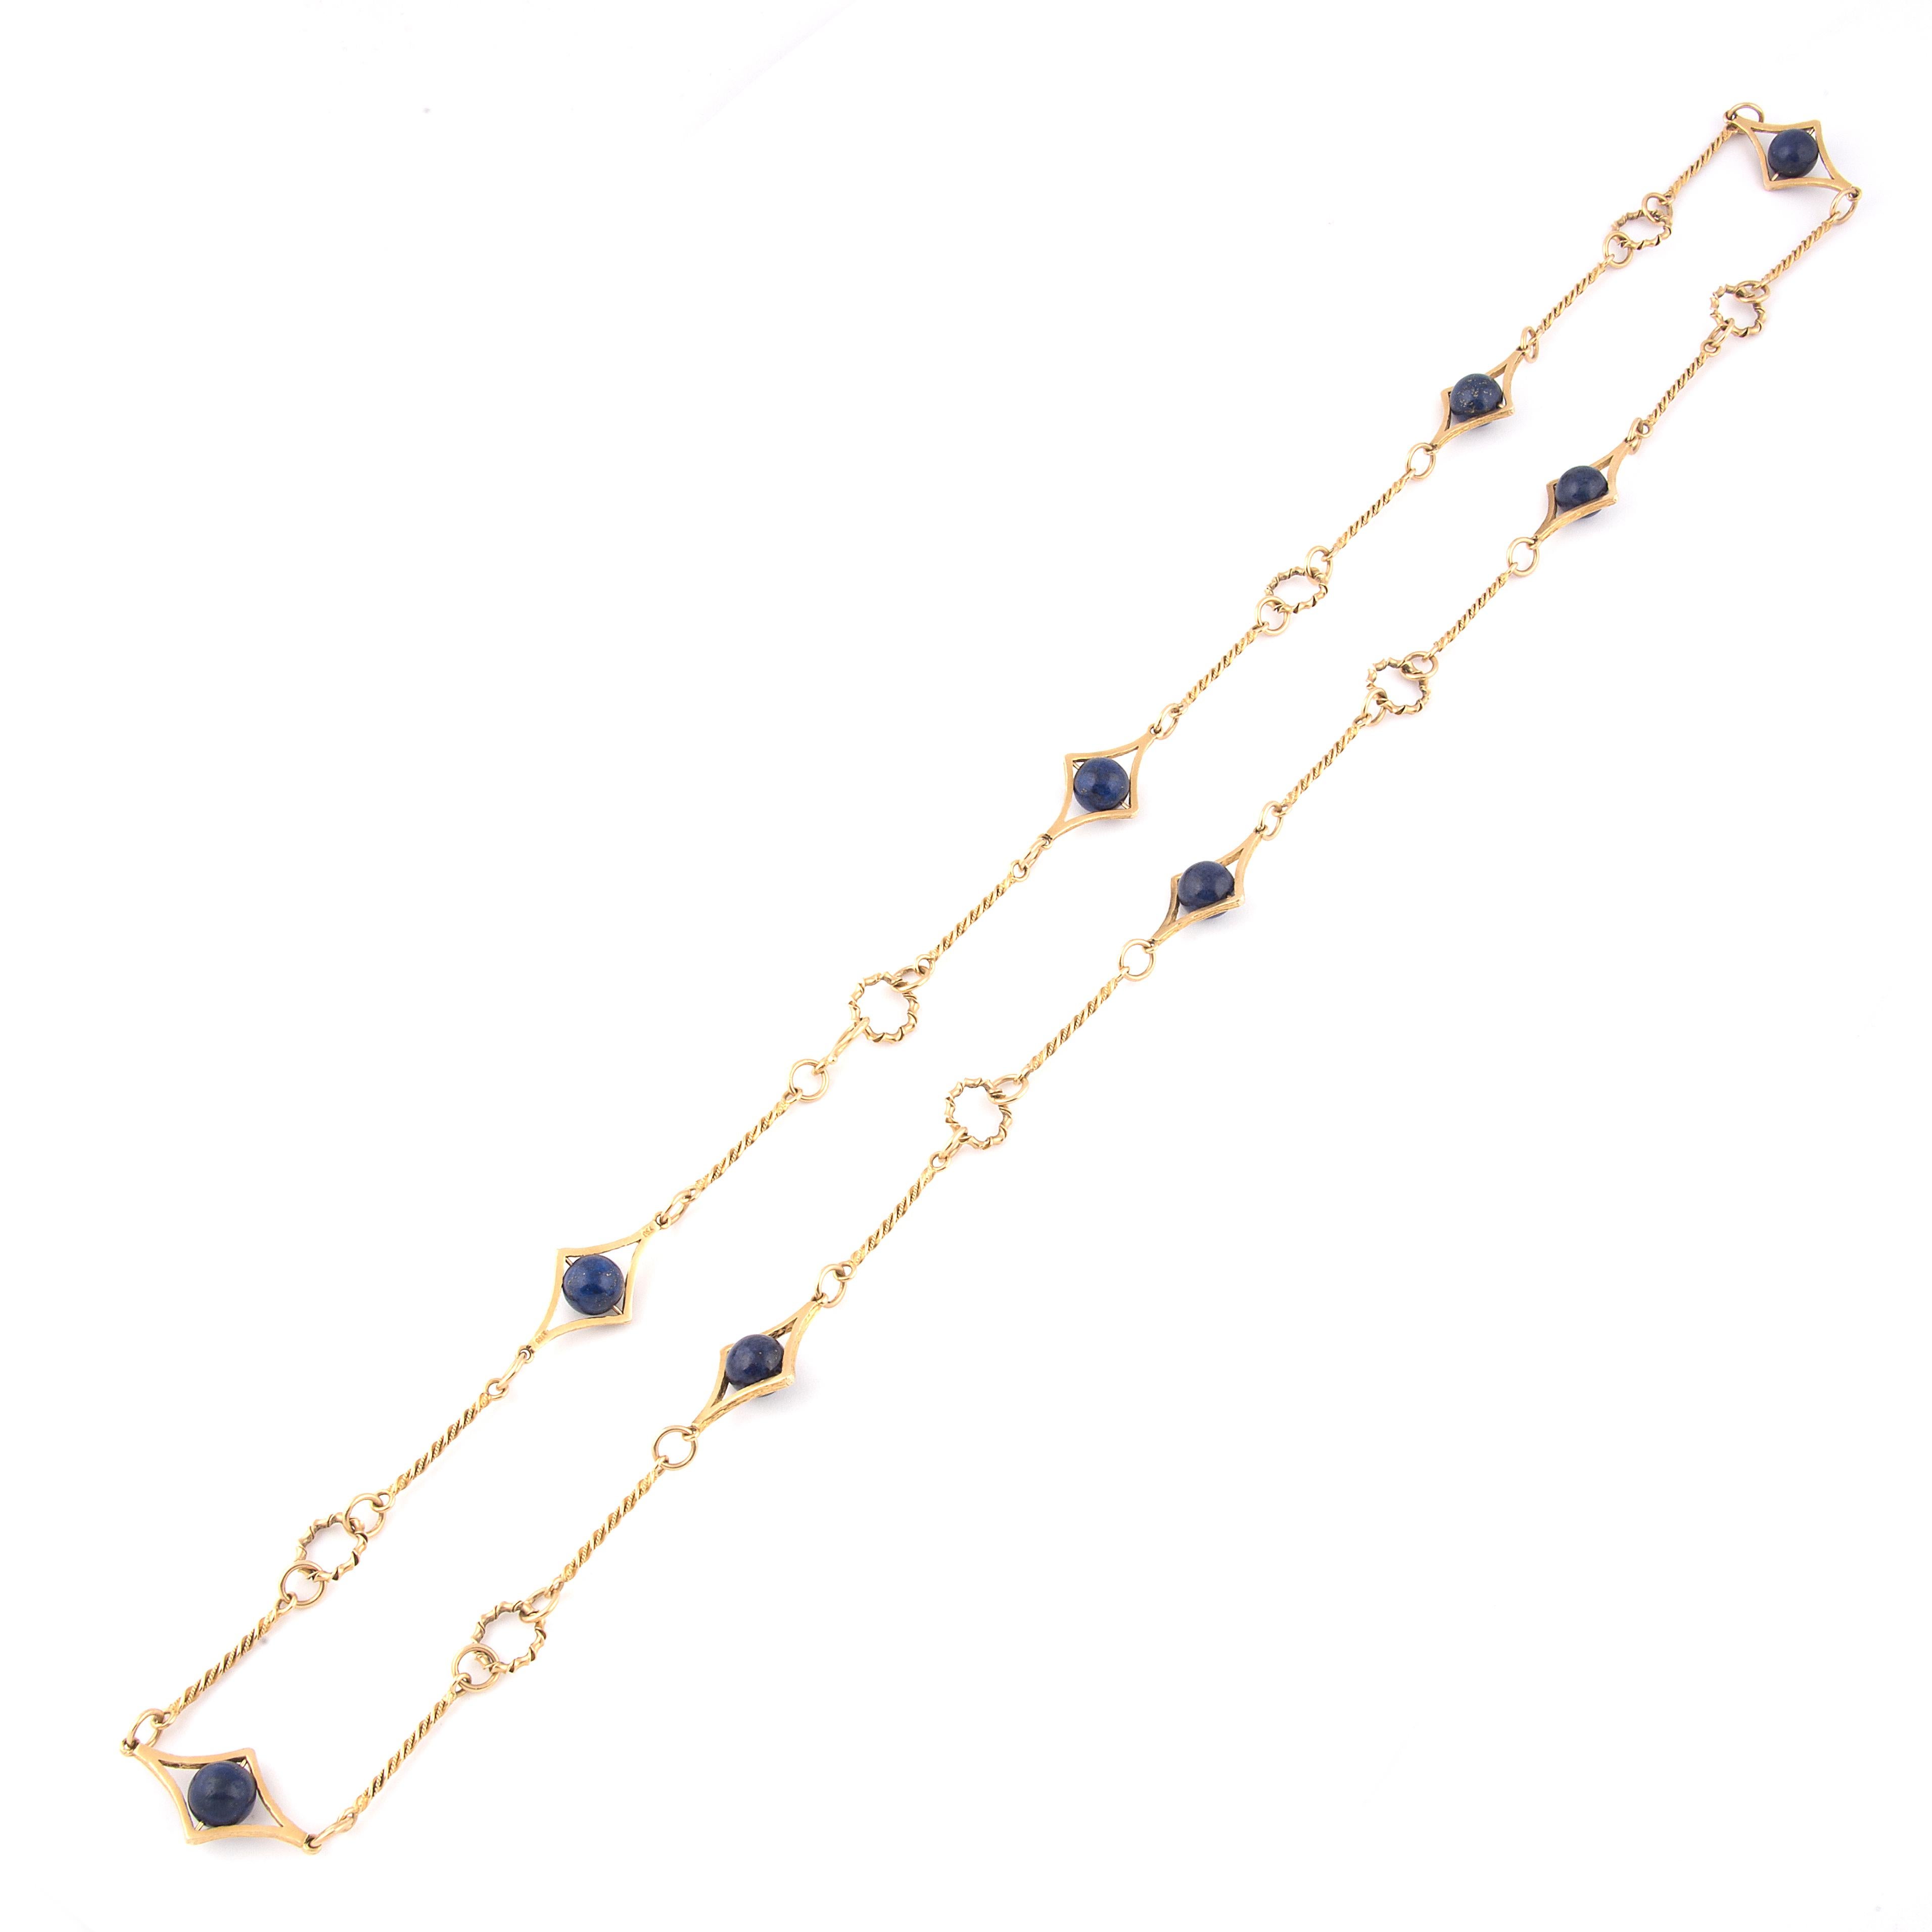 A stylish long 'sautoir' necklace, the 18k yellow gold twisted robe links connecting lozenge links set with Lapis Lazuli beads
Marked 750 and numbered B38
Italian, 1970's
